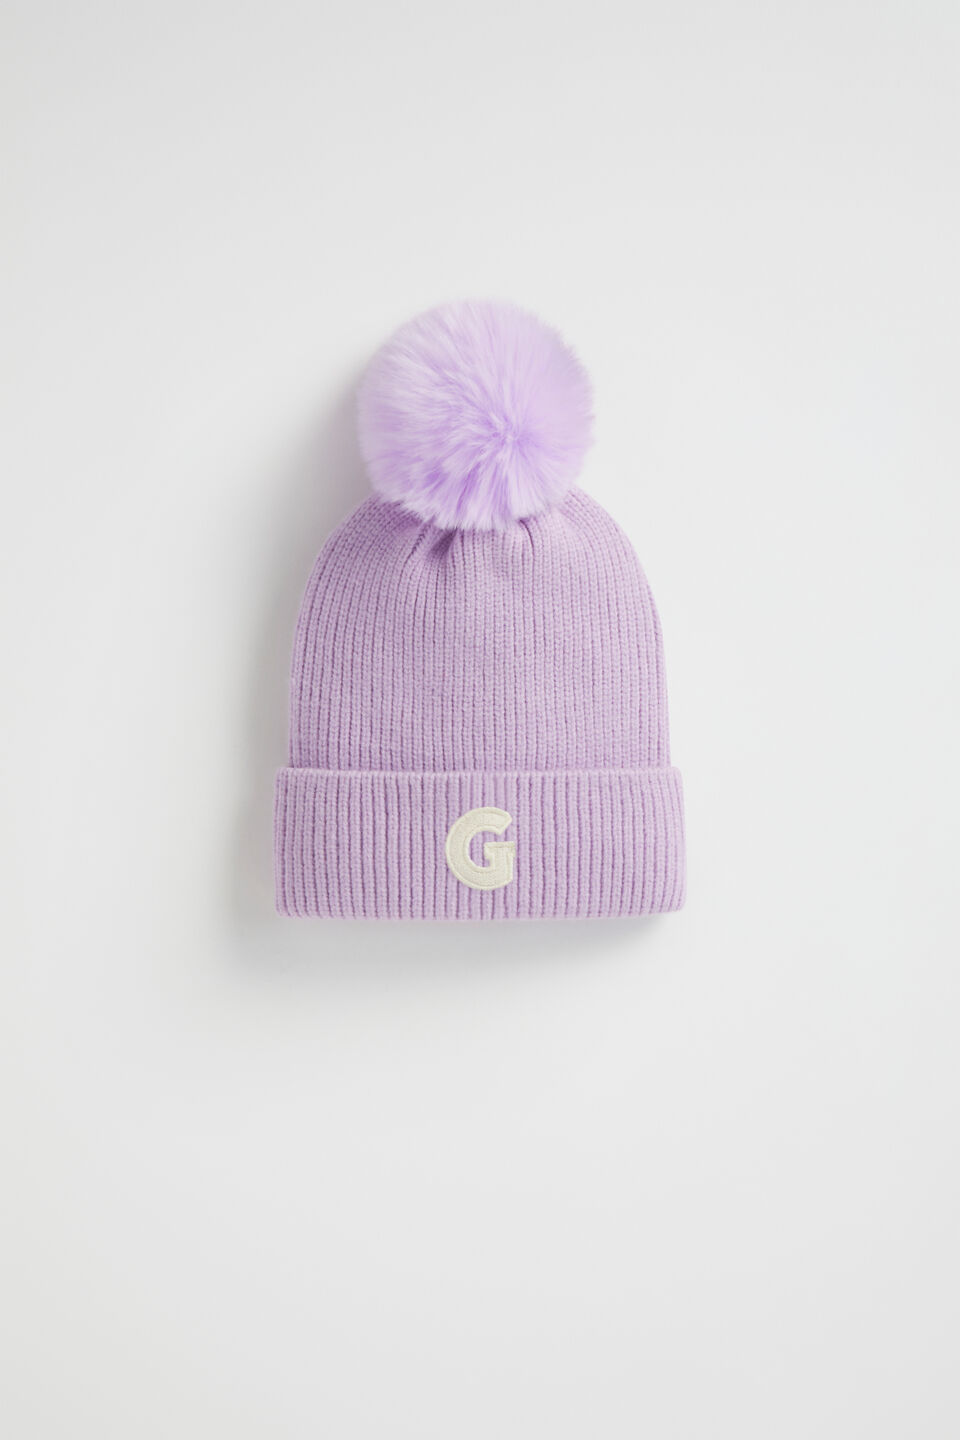 Embroidered Initial Beanie  G